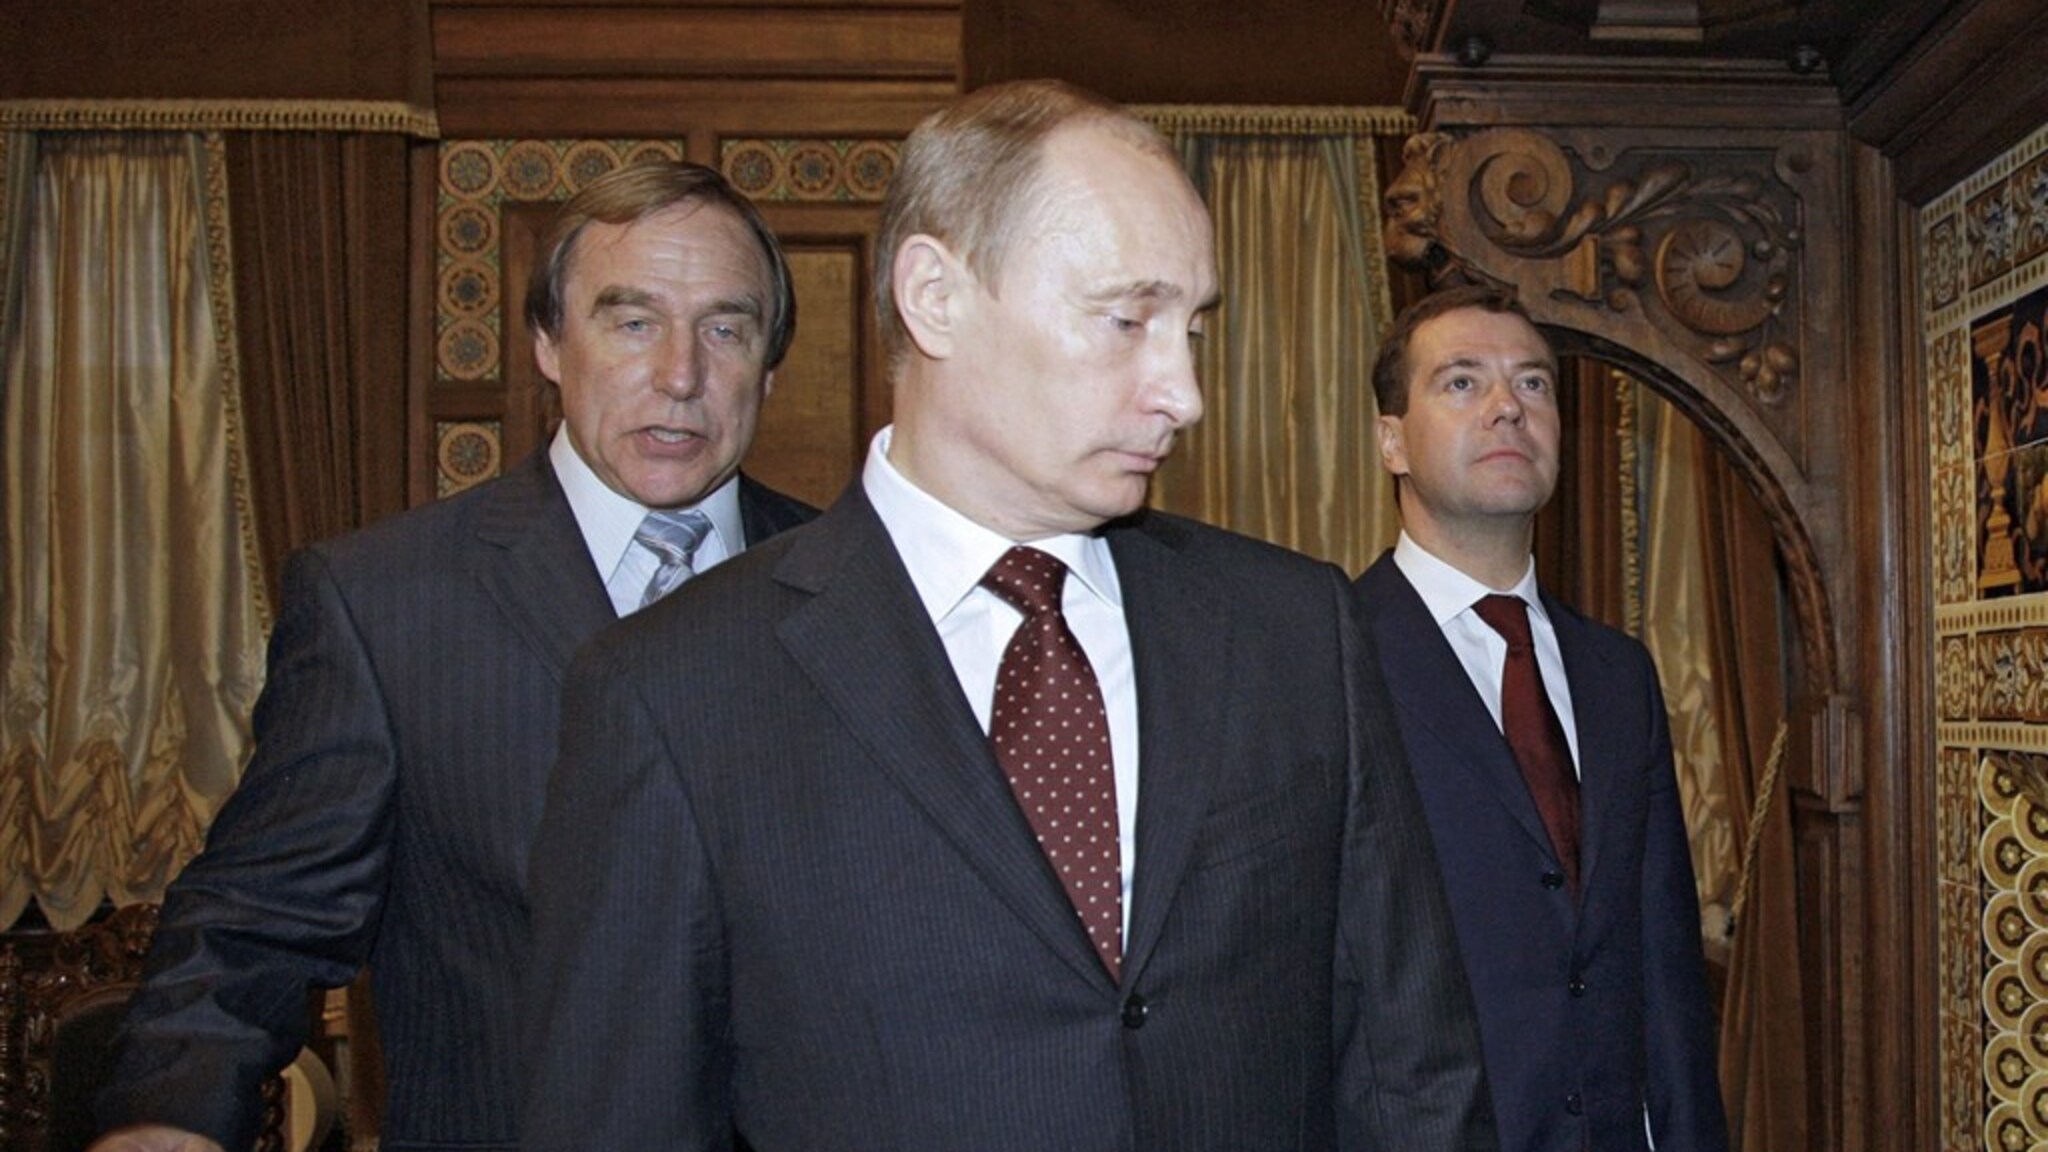 This is the skilled financial worker of Vladimir Putin